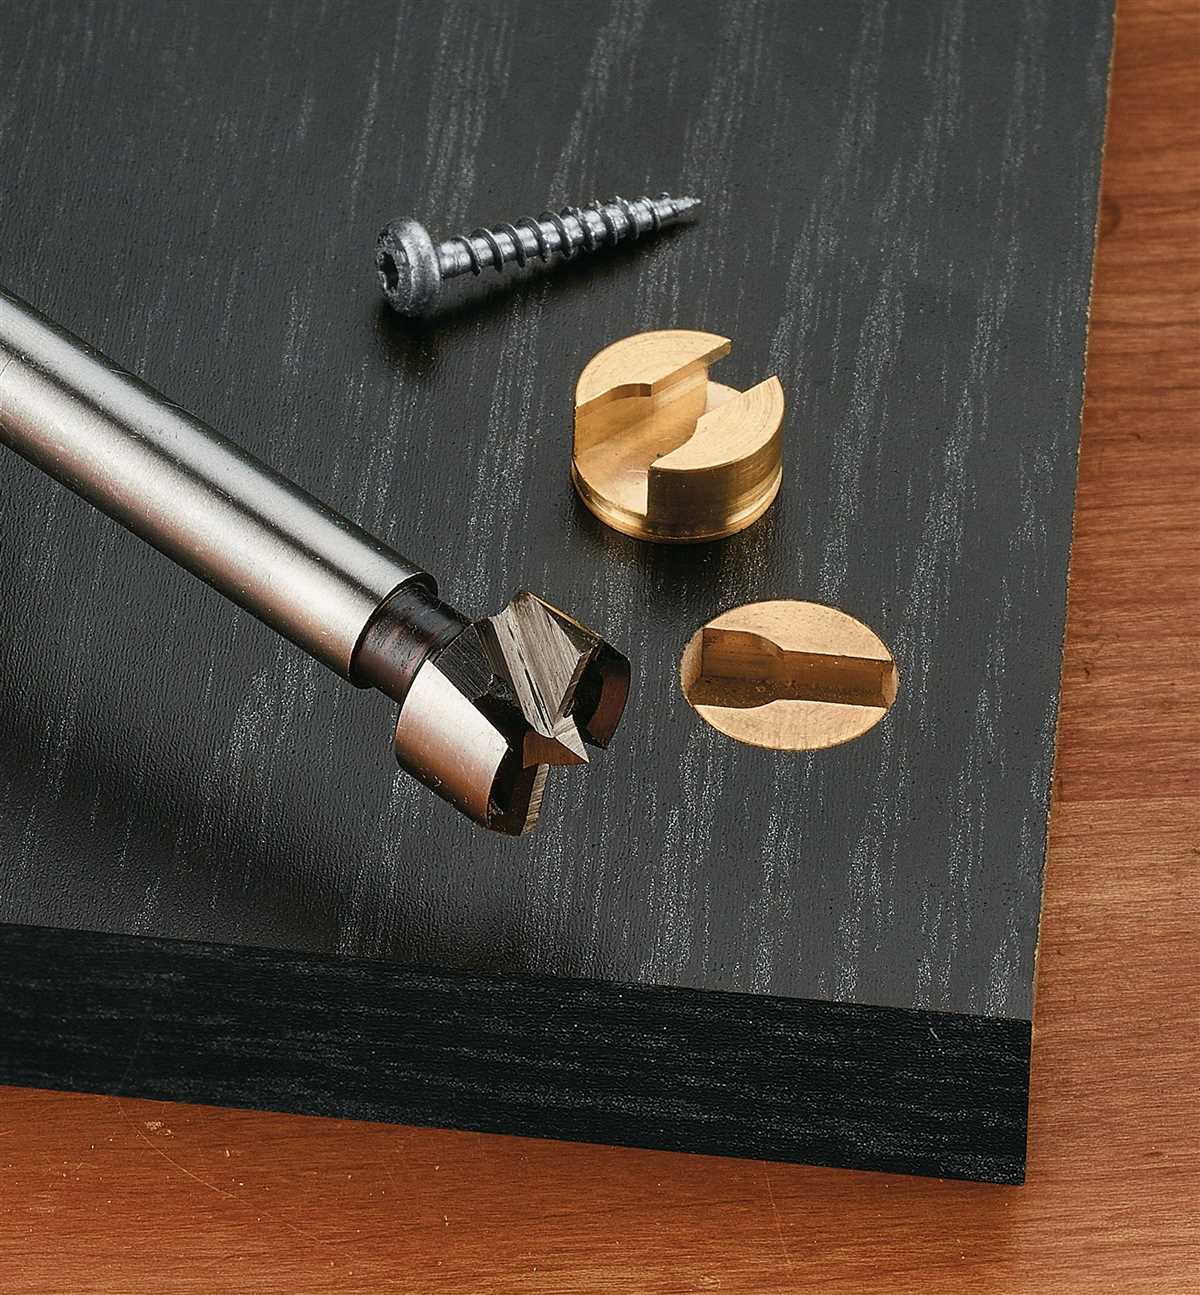 Keyhole Slots in Wood Using a Drill